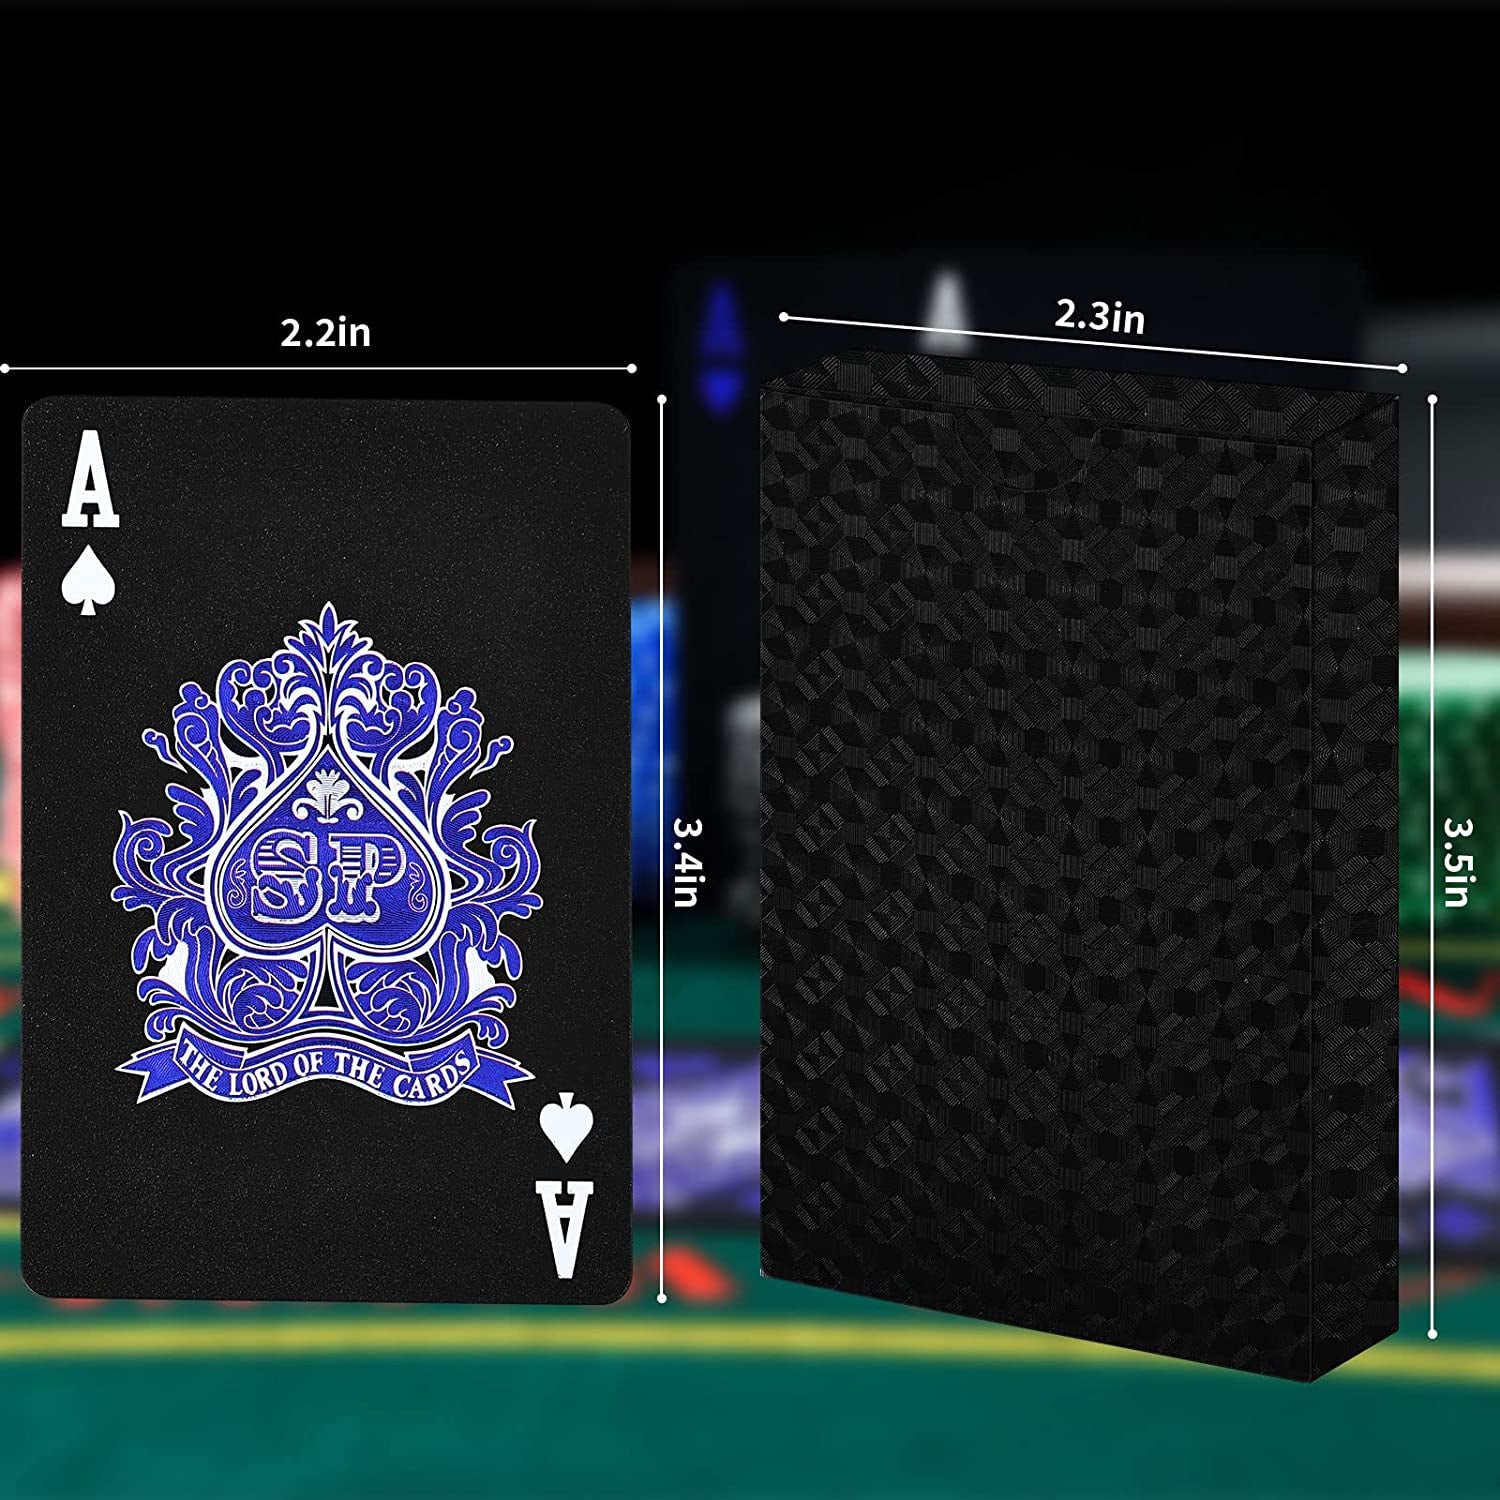 Black Playing Cards , Waterproof Poker Cards, PET Playing Cards with Box Suitable for Pool, Beach, Camping, Party, Family or Friend Card Games